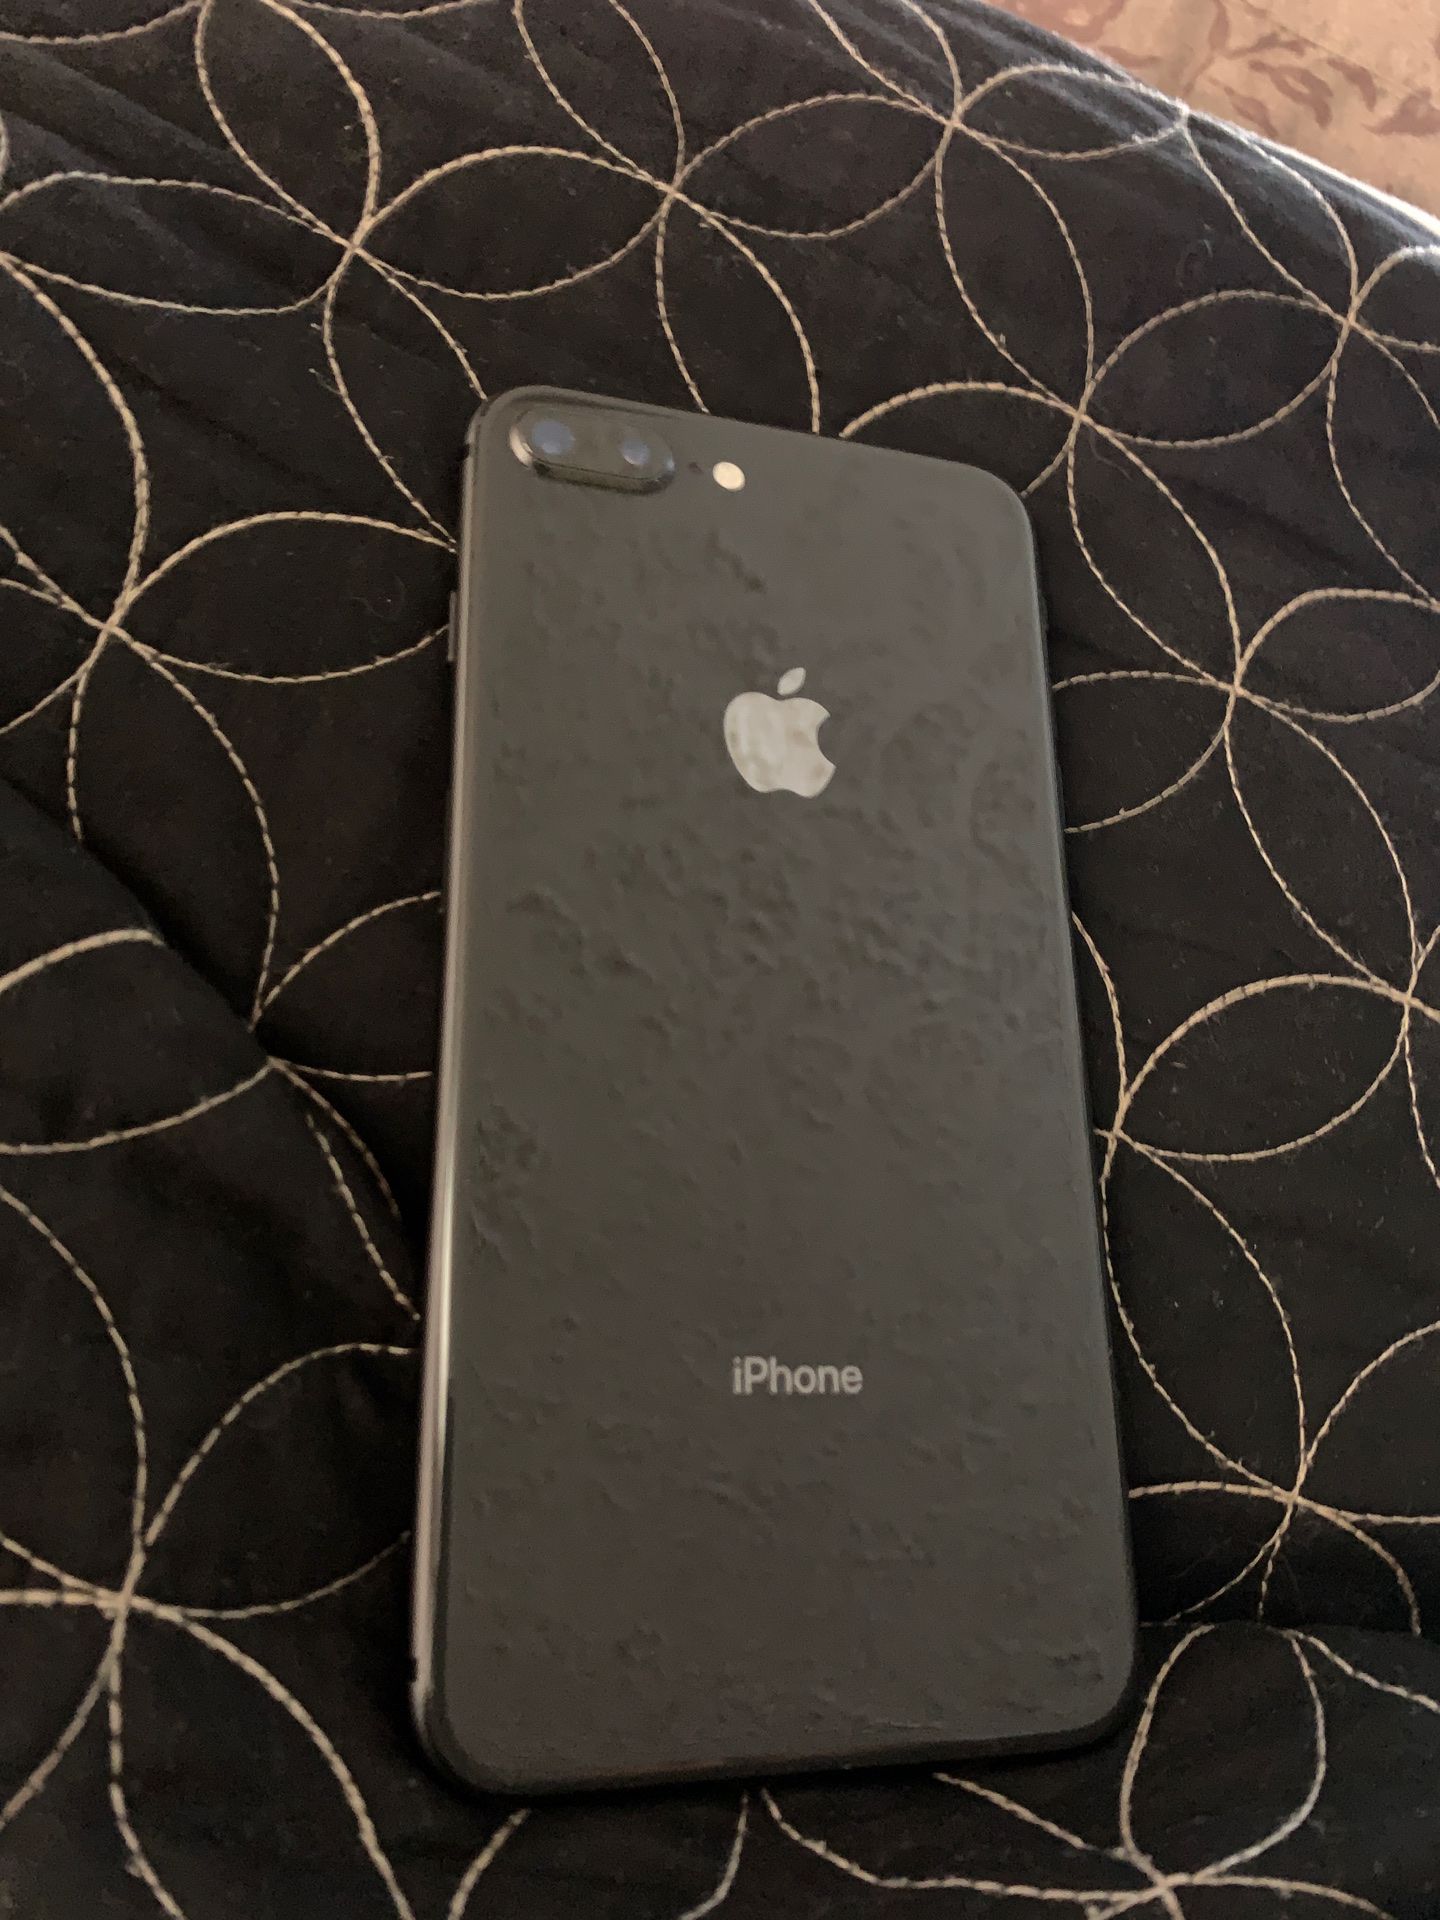 Immaculate iPhone 8 Plus Space Grey 256 GB Att/Cricket Only